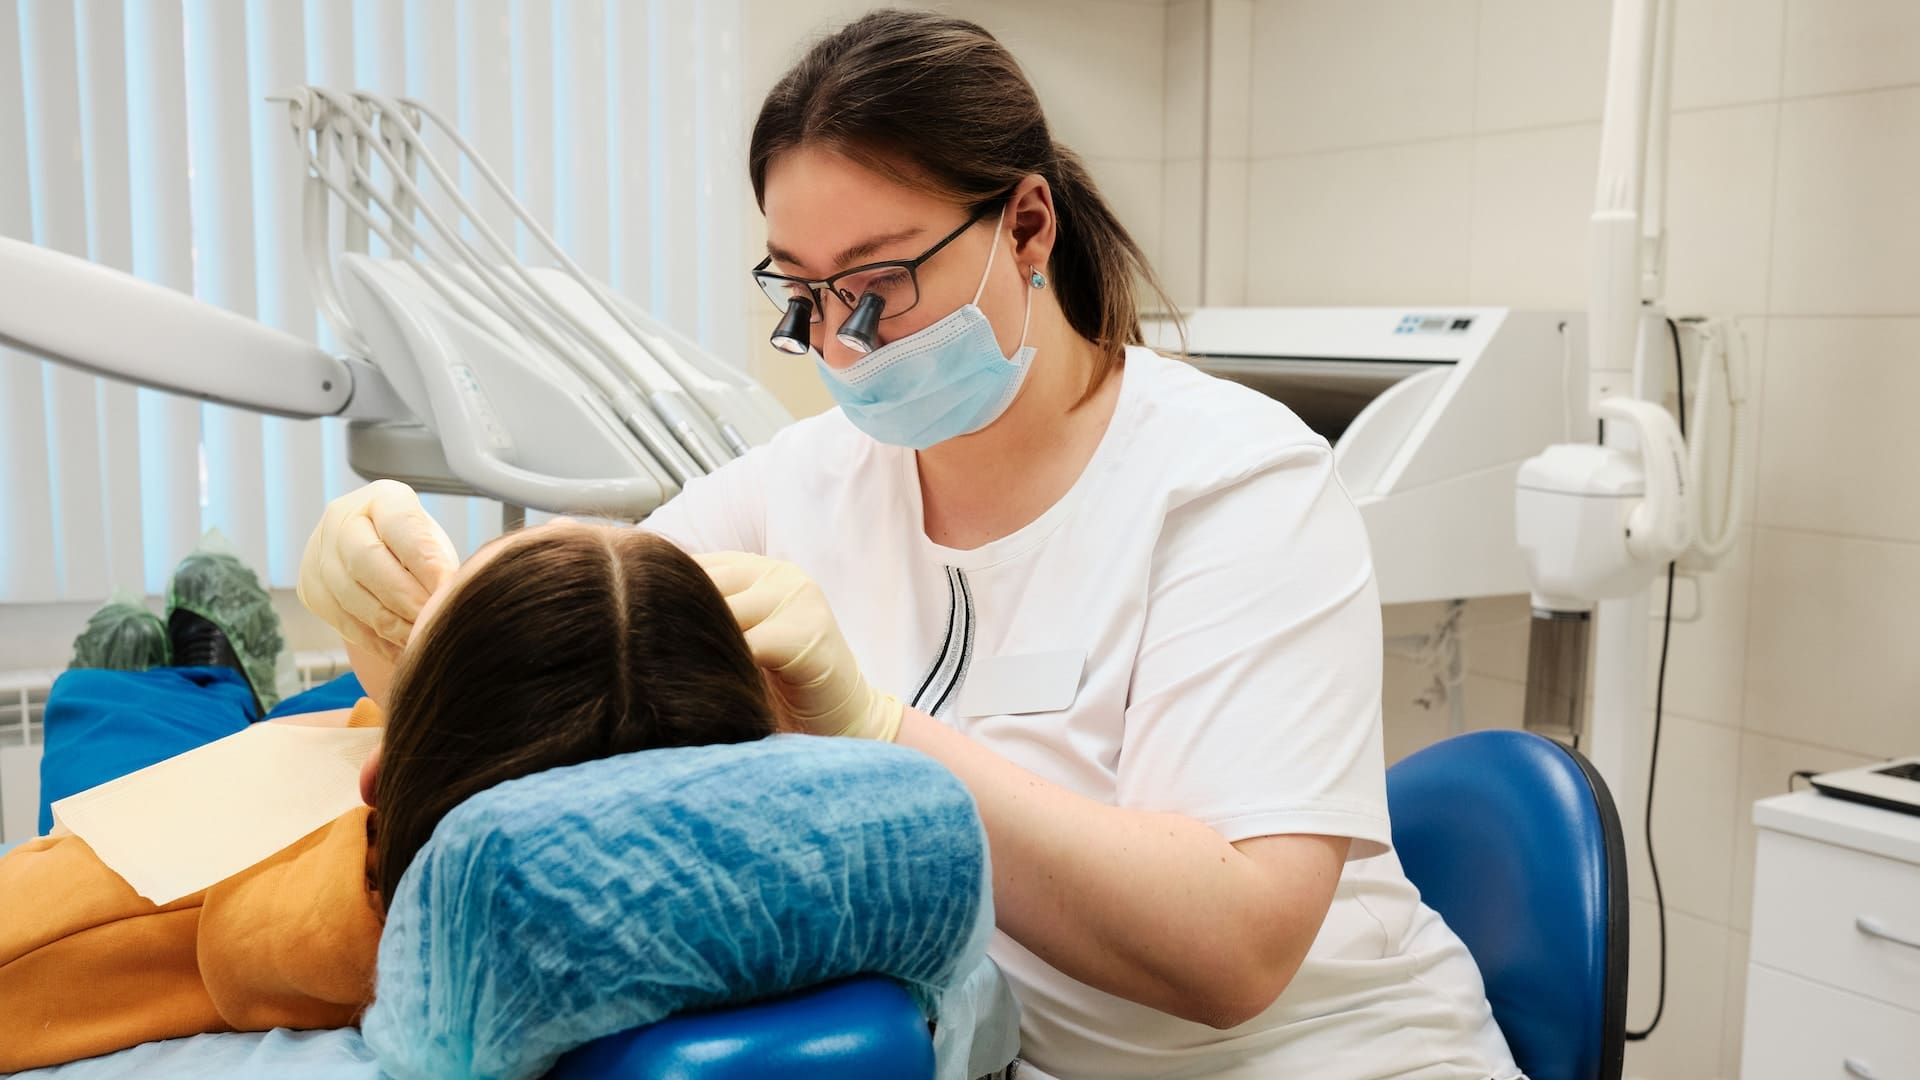 Dentist wearing glasses with attached lenses, providing dental treatment to a patient.